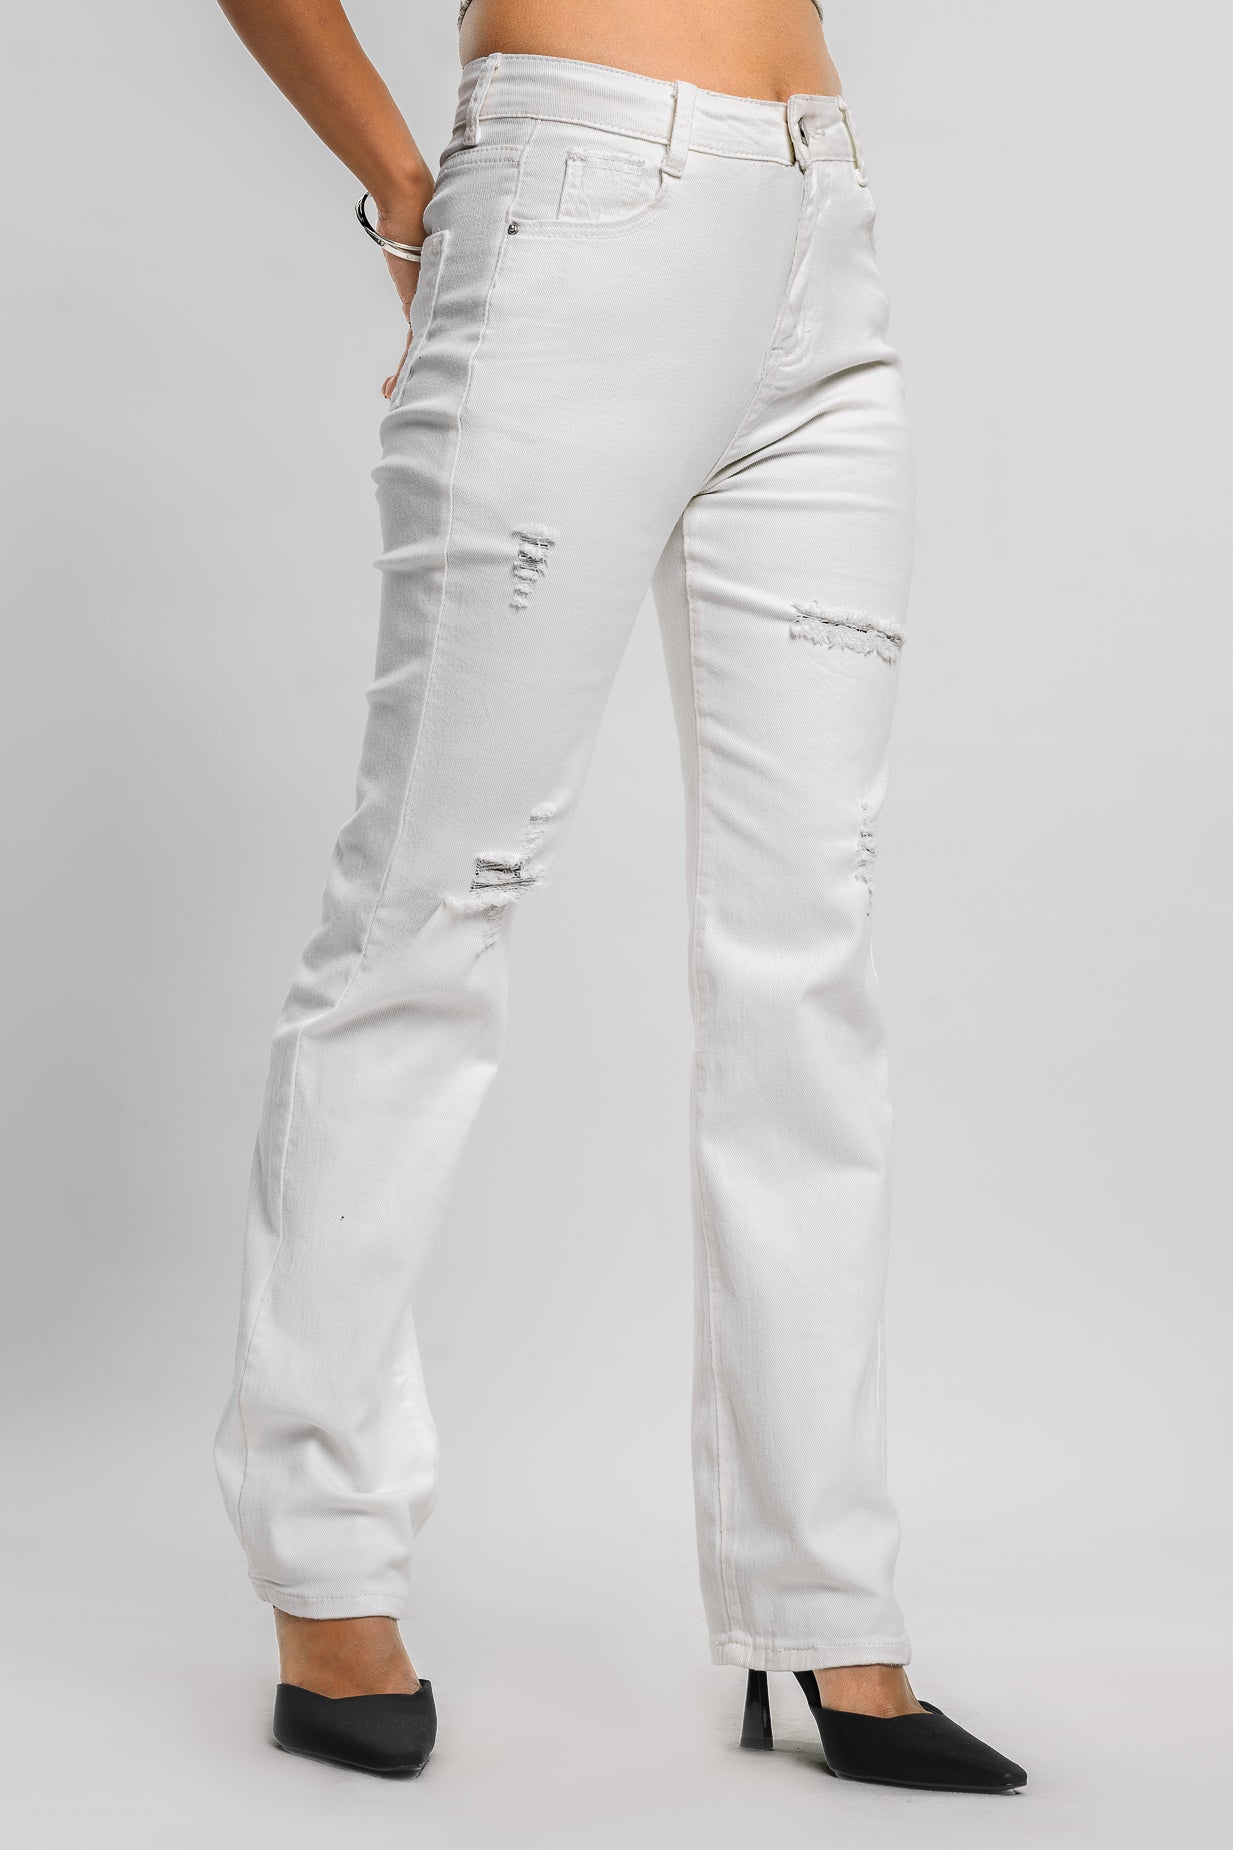 WHITE SLIM FIT DISTRESSED JEANS